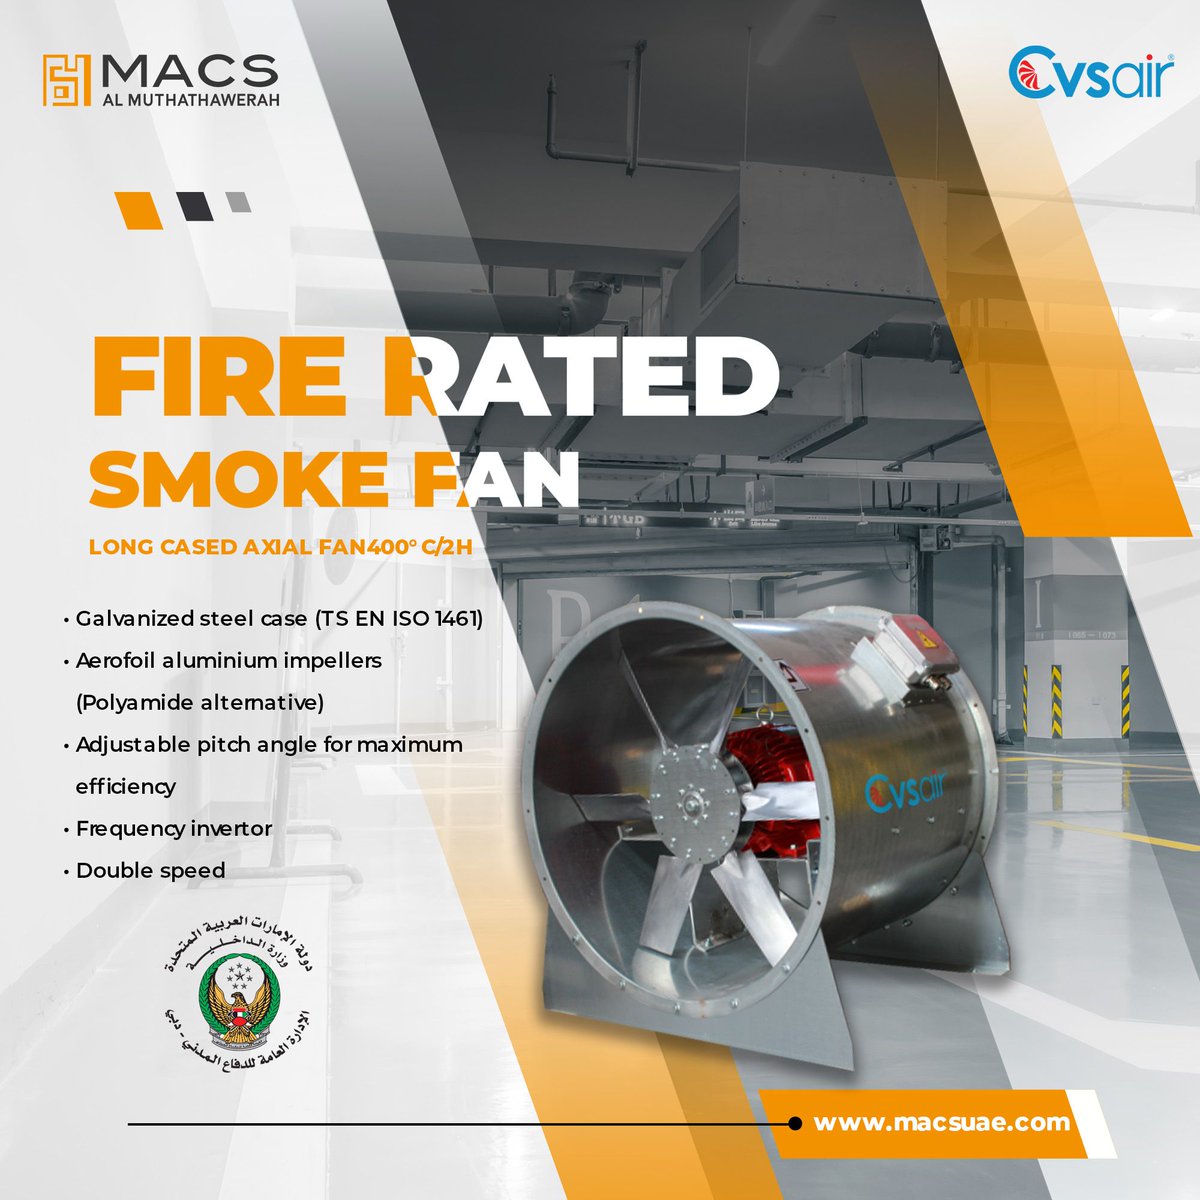 High-Performance Fire-Rated Smoke Fan (2 hours fire rated 400°C) 

For additional details, contact us at:
Email: info@macsuae.com
Website: macsuae.com 

#macs #MacsGroup #FireRatedFan #SmokeExtraction #HVAC #VentilationSystem   #IndustrialFans #AirQuality  #uae #dxb